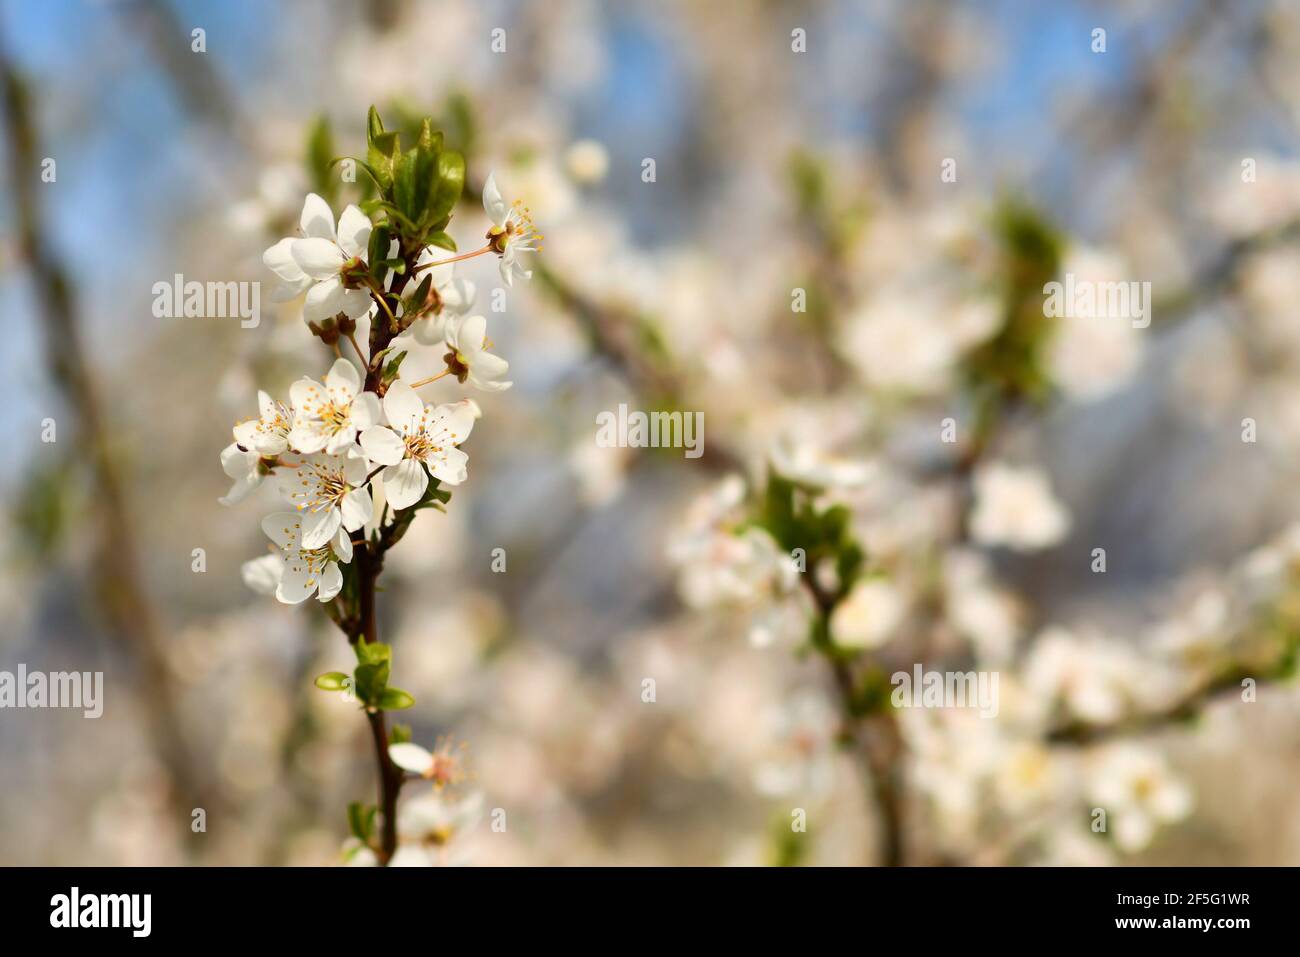 Branch of European white cherry blossom flowers on tree in early spring on blurry background Stock Photo